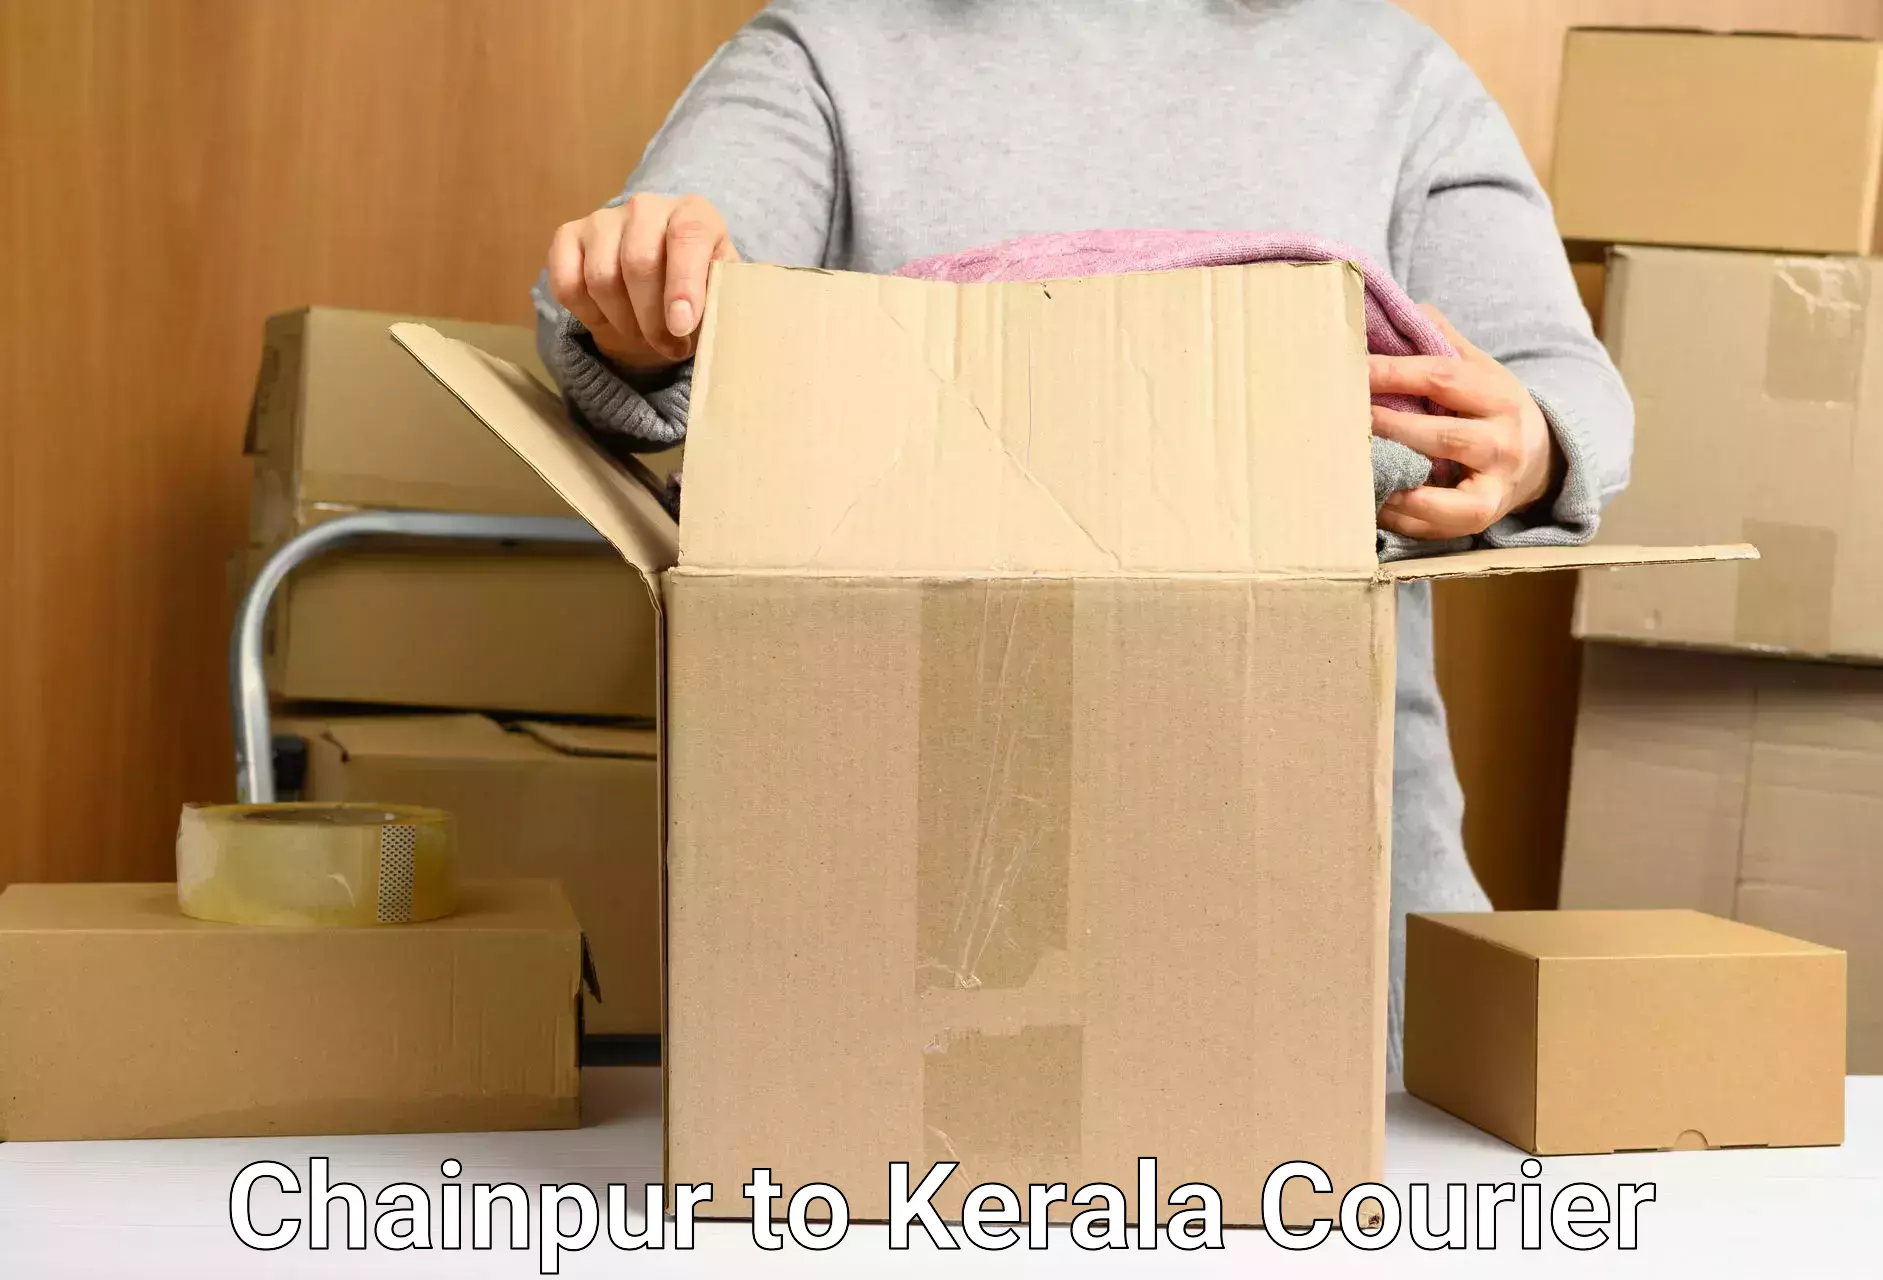 International courier networks Chainpur to Kerala